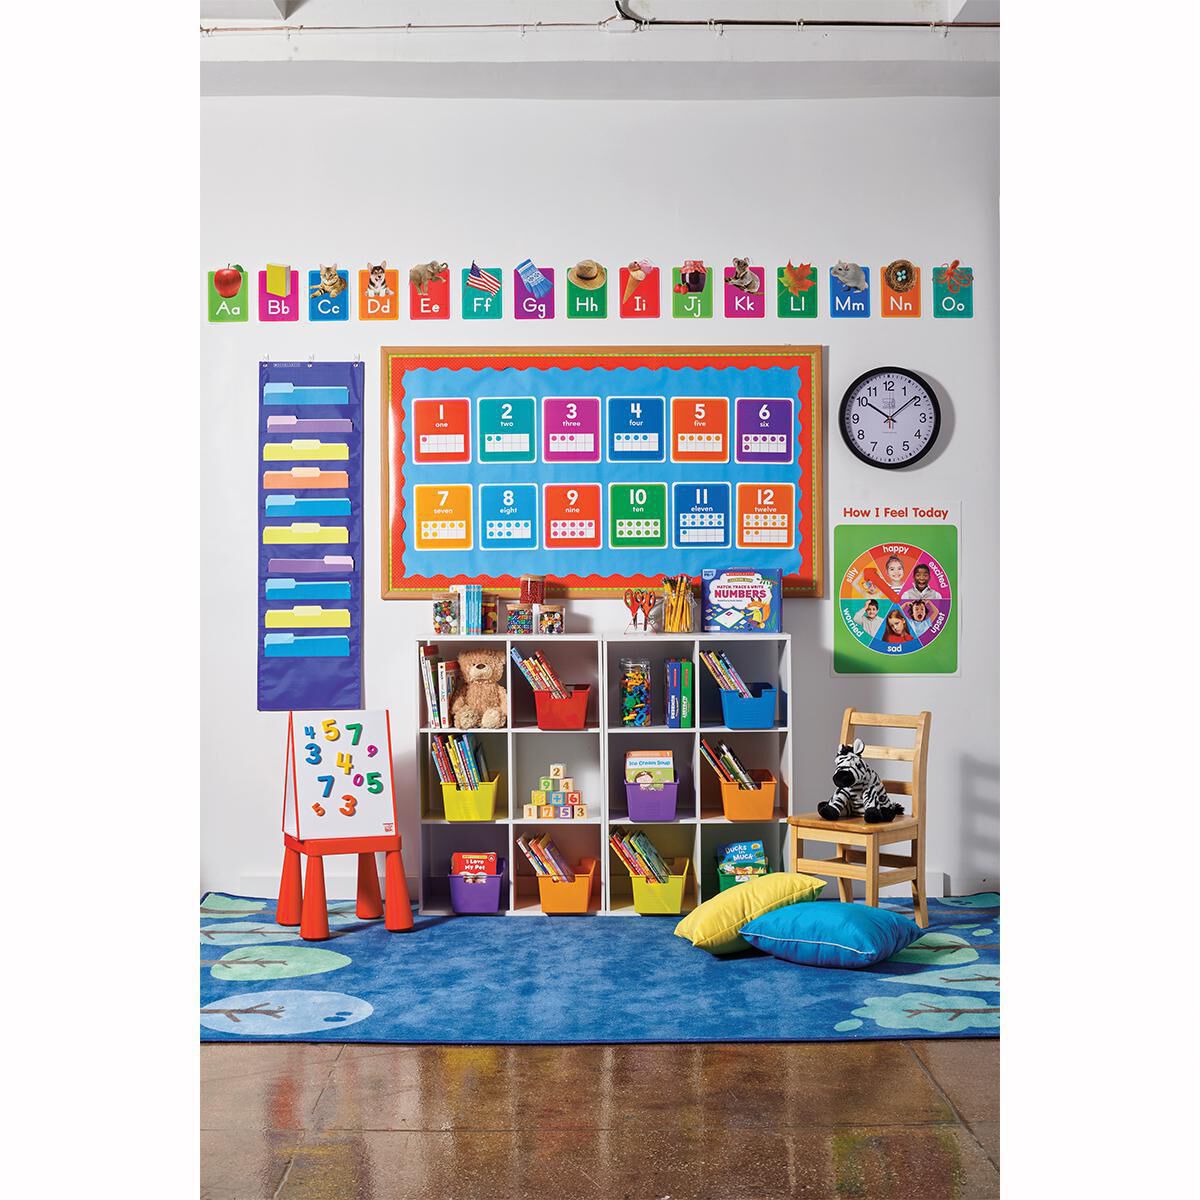 SCHOLASTIC 0-20 NUMBERS BULLETIN BOARD ST 